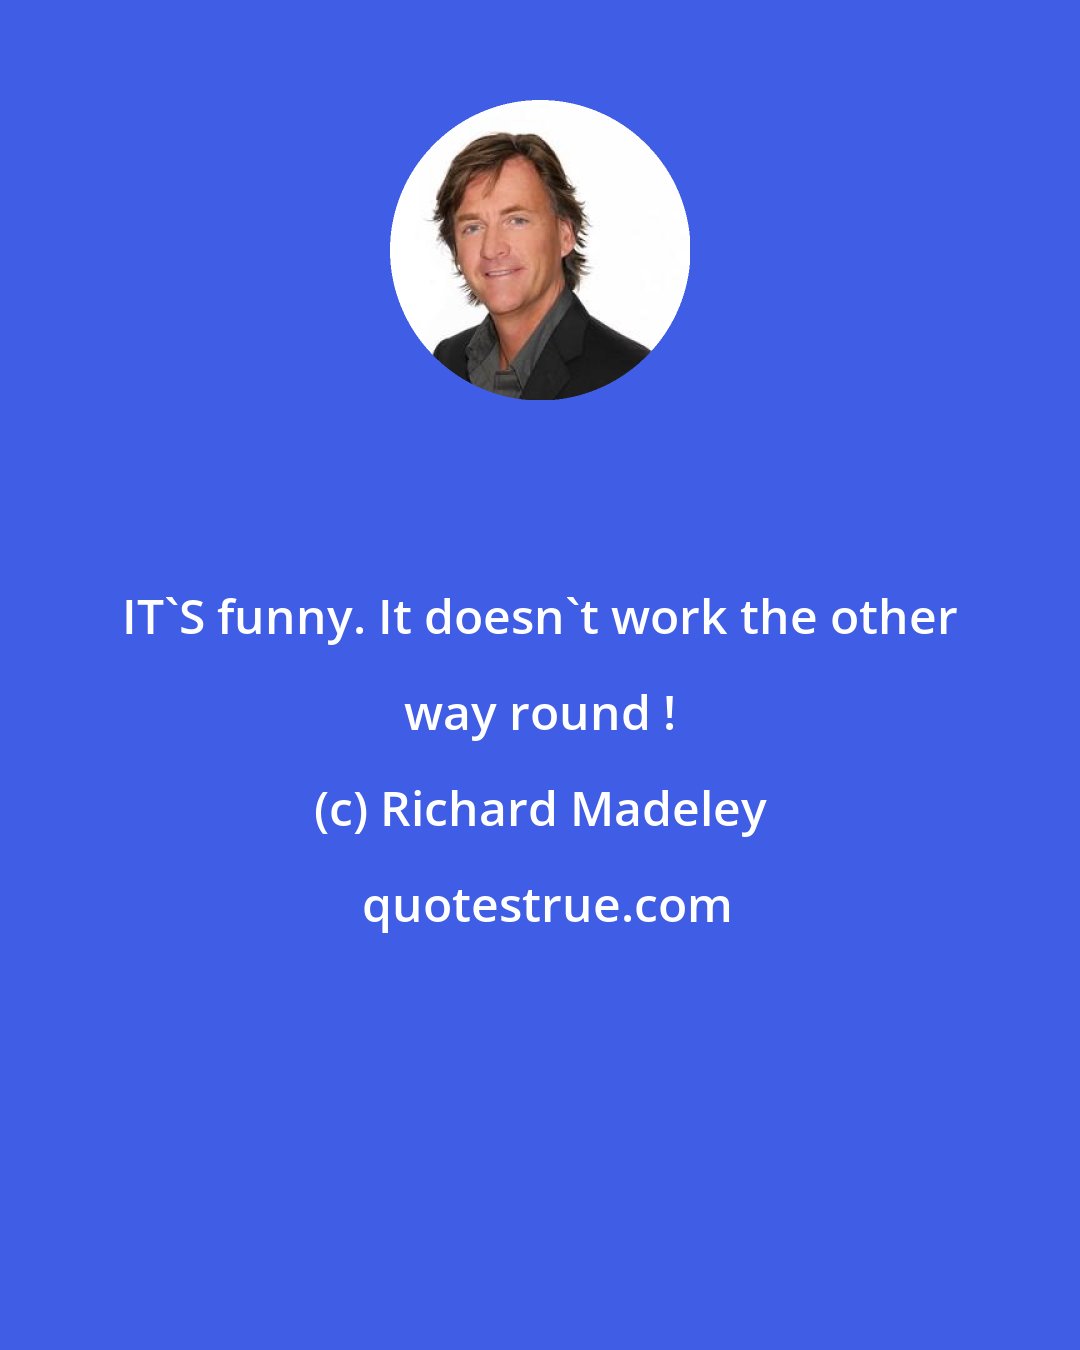 Richard Madeley: IT'S funny. It doesn't work the other way round !